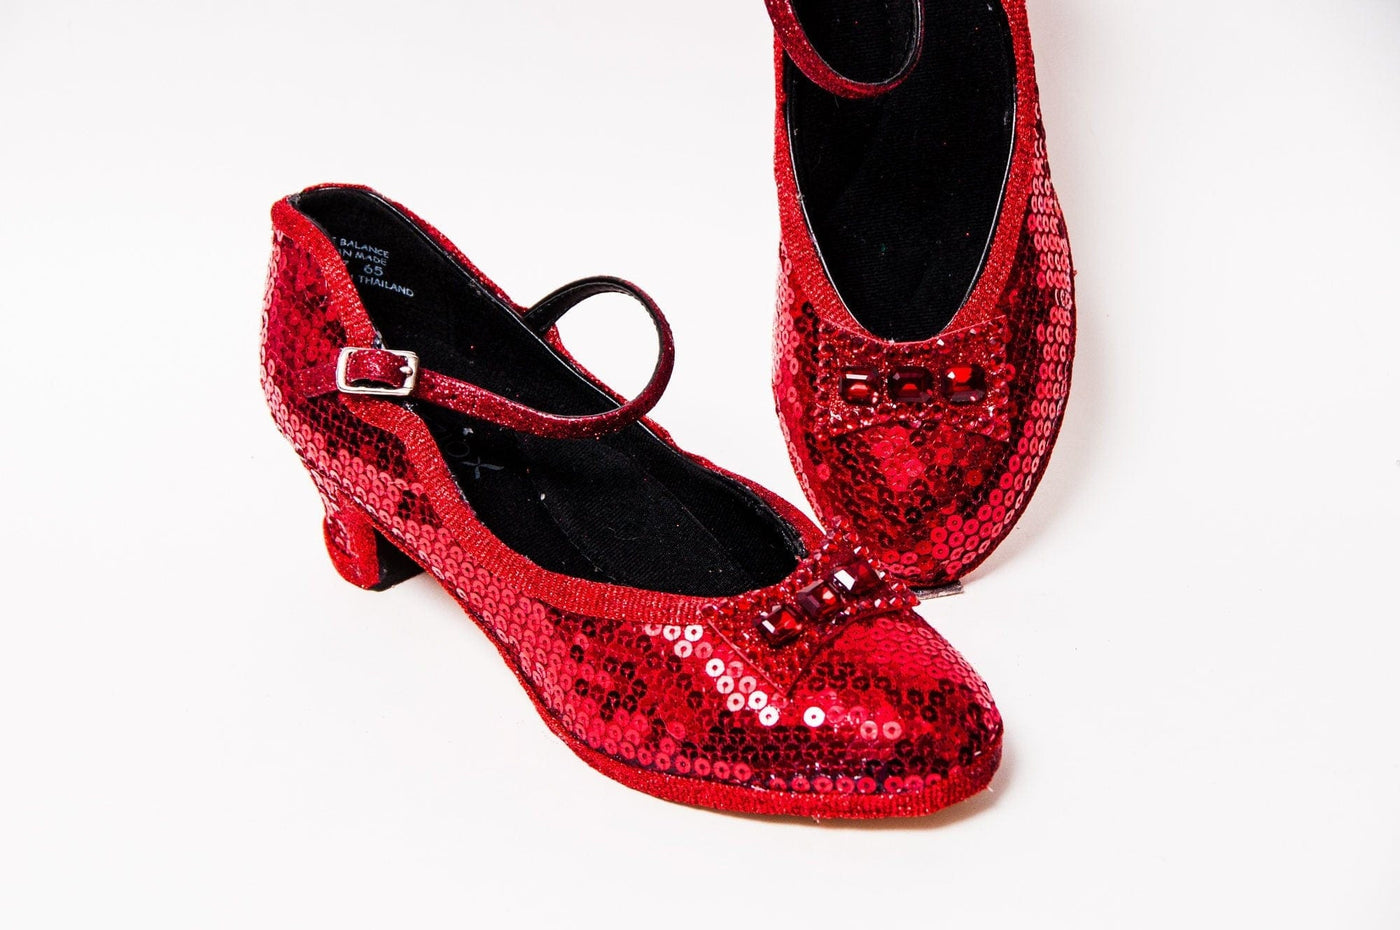 Wedding Shoes Red Sequin French High Heels. Brides, Bridesmaids, Halloween, Cosplay